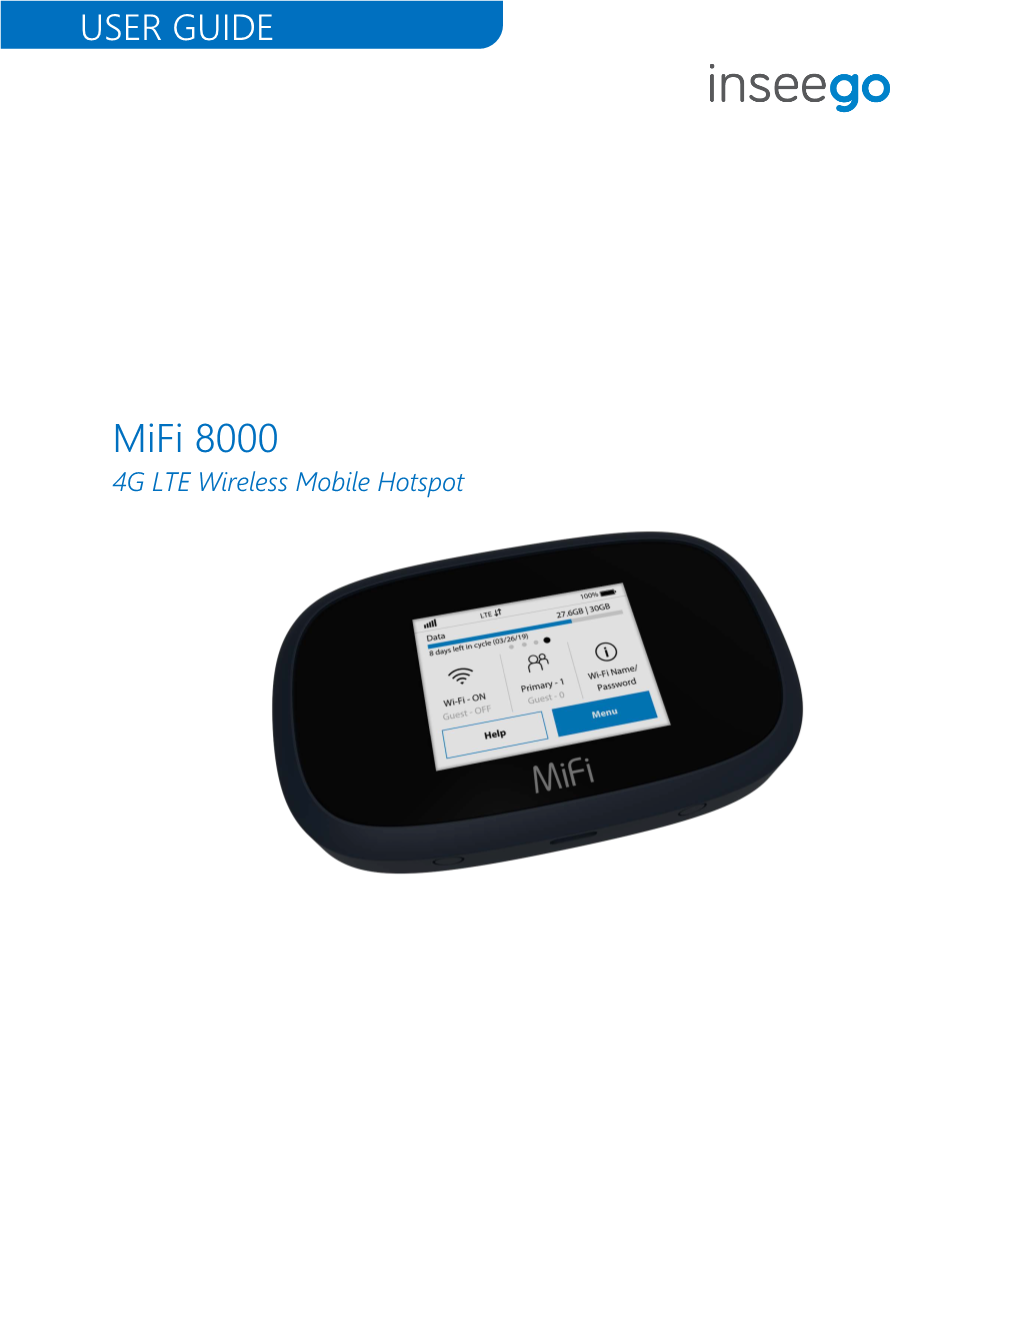 Mifi 8000 4G LTE Wireless Mobile Hotspot ©2019 Inseego Corp